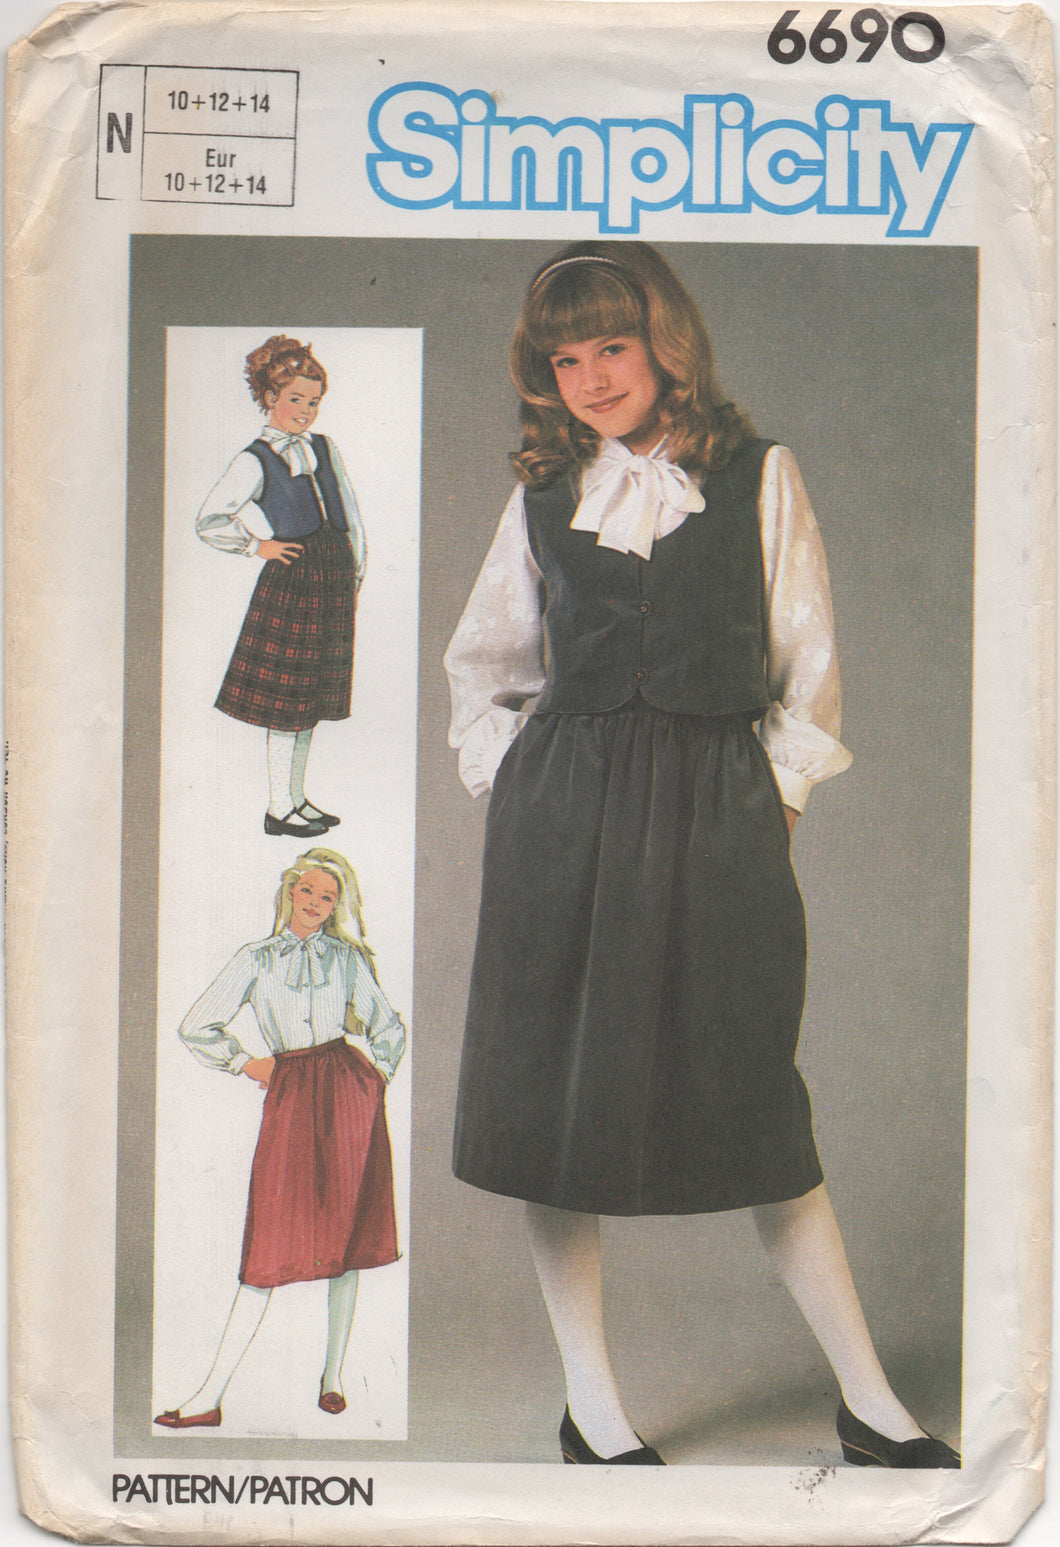 1980's Simplicity Child's Dress and Blouse with Bow accent - Bust 28.5-30-32